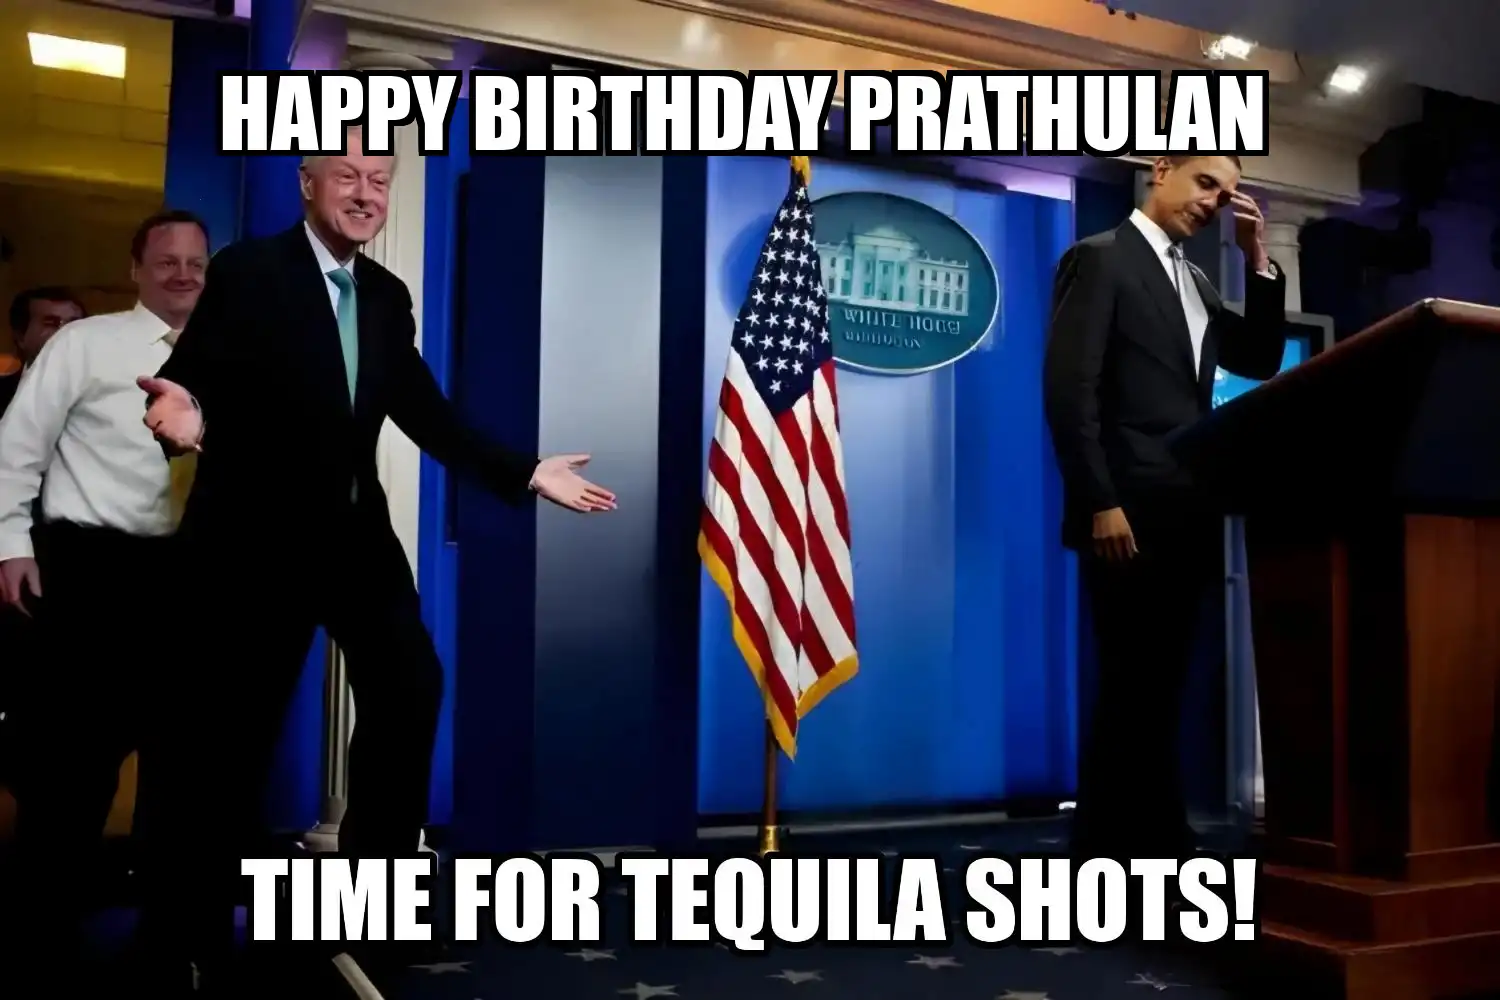 Happy Birthday Prathulan Time For Tequila Shots Memes